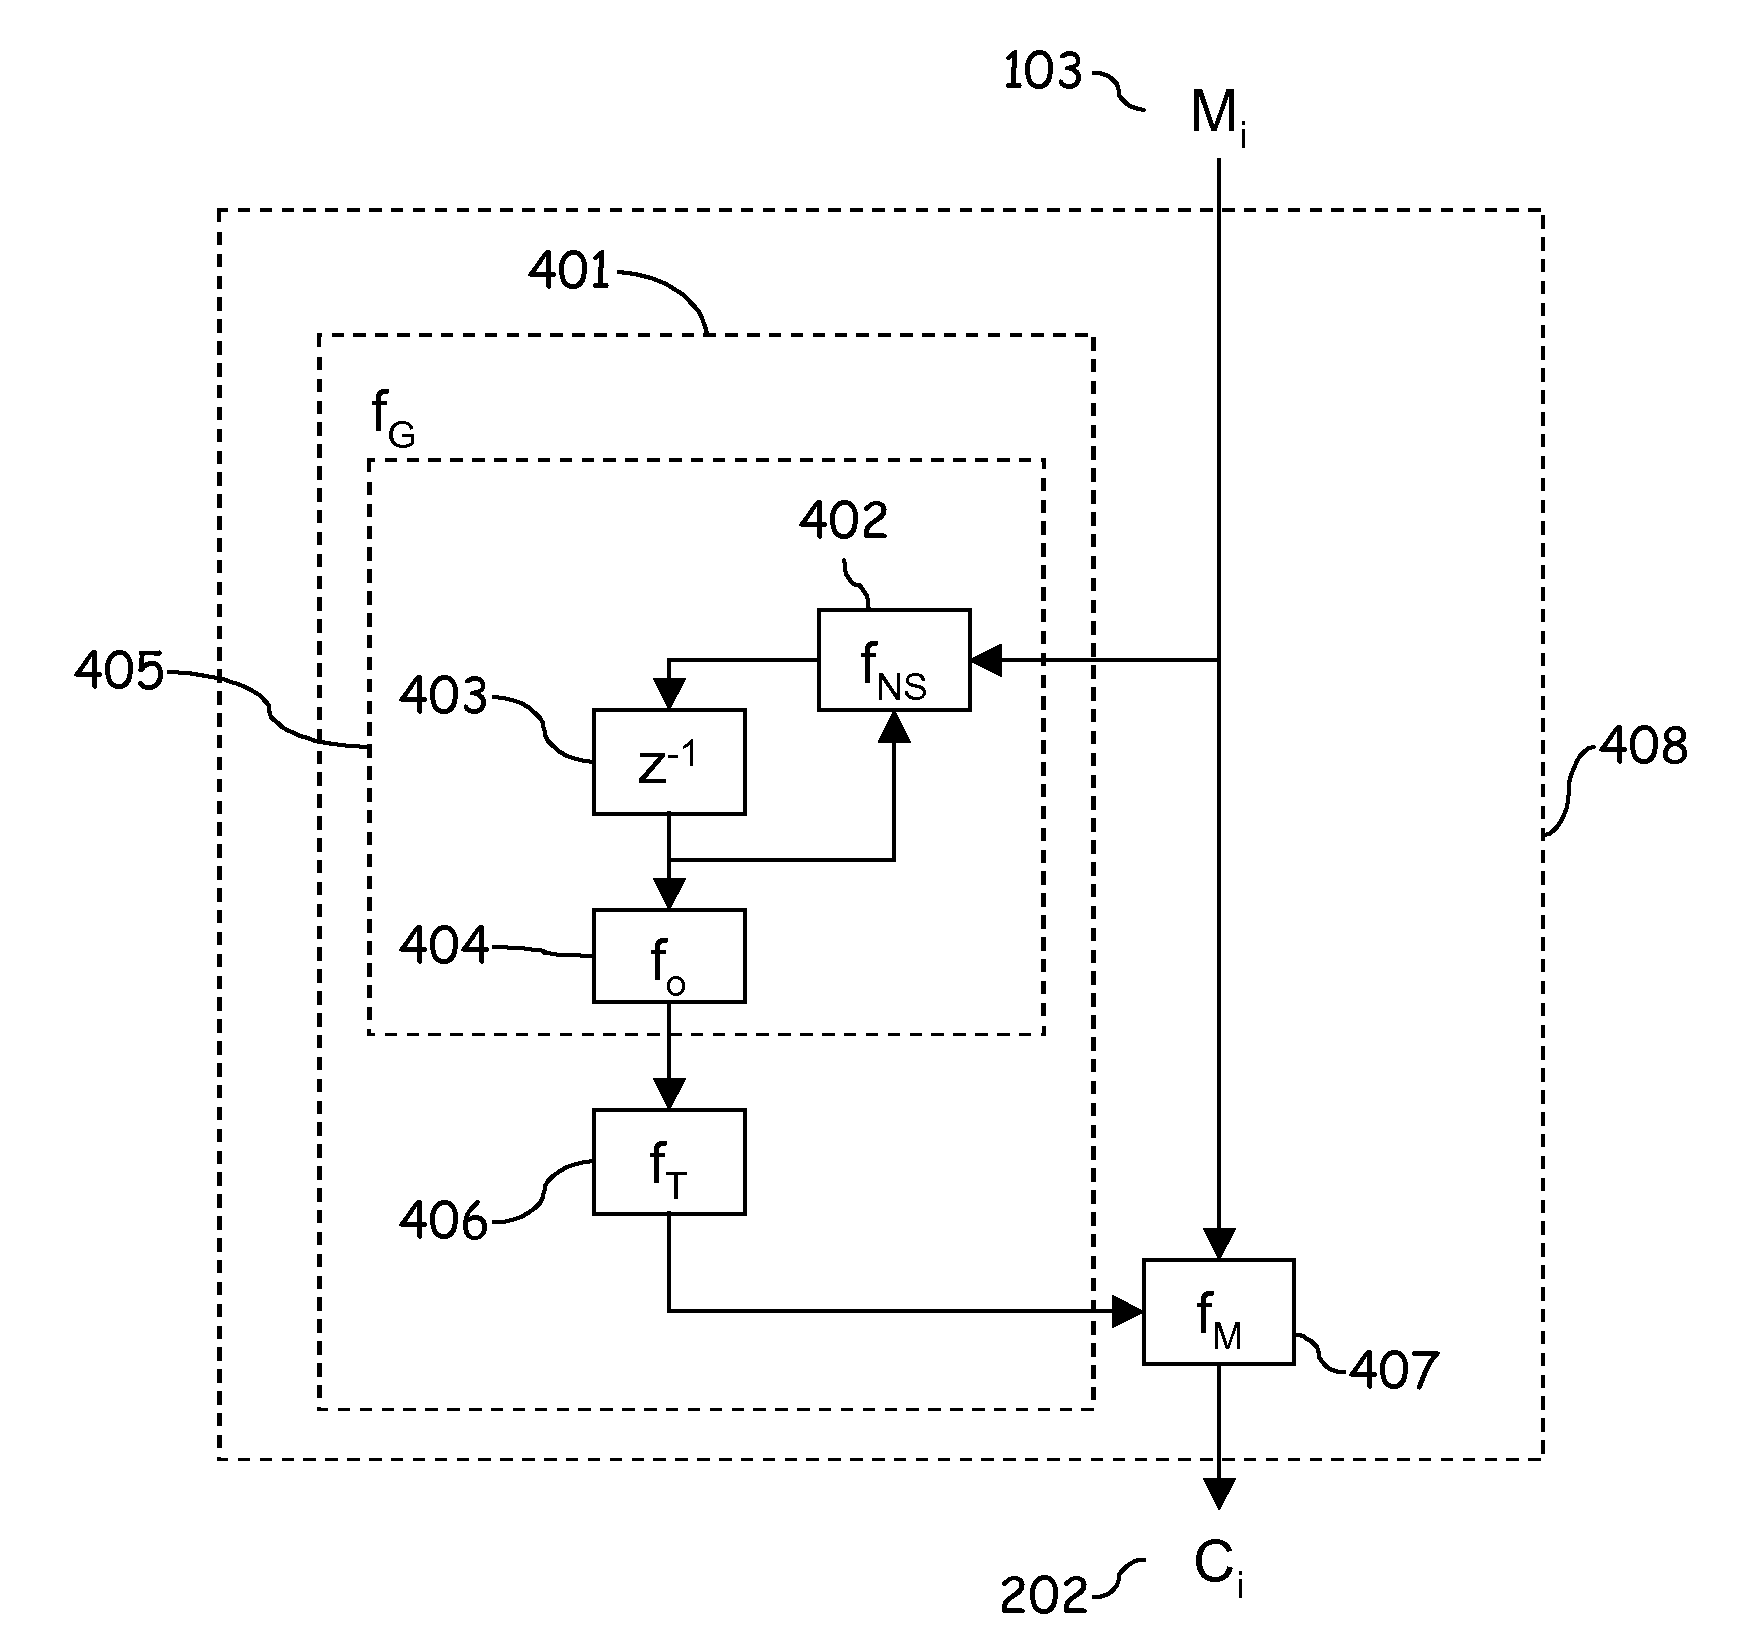 Method And Arrangement For Protecting File-Based Information